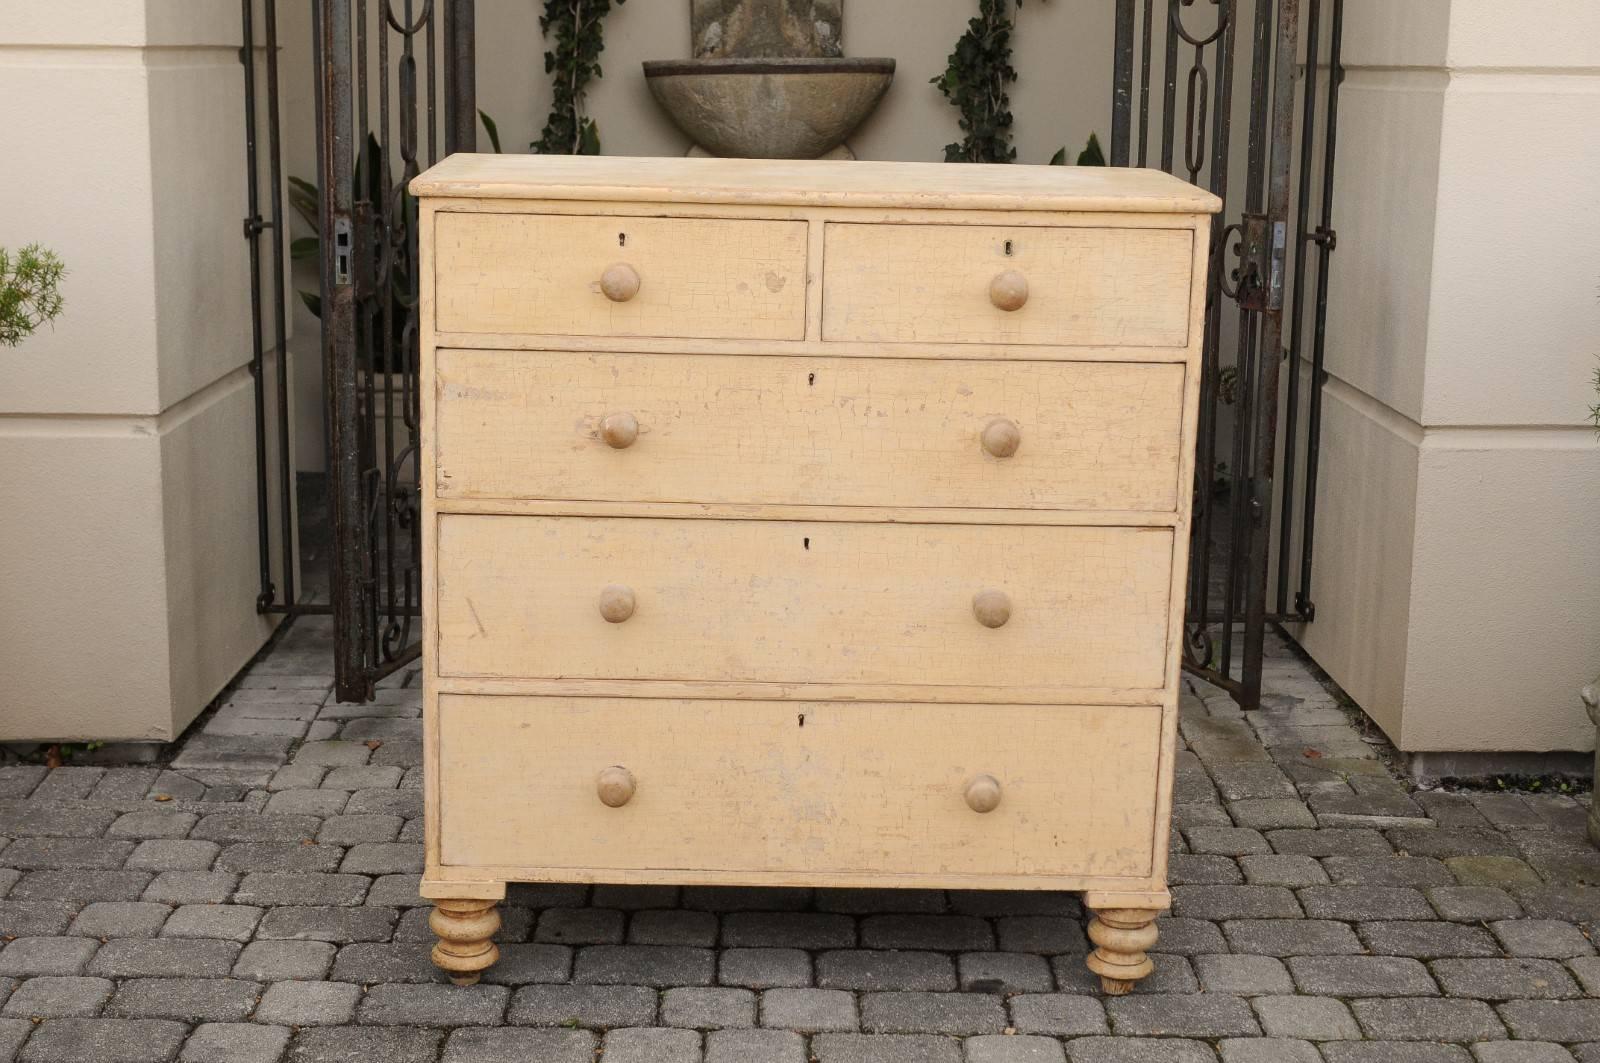 An English Georgian style five-drawer commode from the mid-19th century, dry-scrubbed to its original paint. This tall English chest features a rectangular top sitting above five dovetailed drawer. The upper section comprises two small drawers,